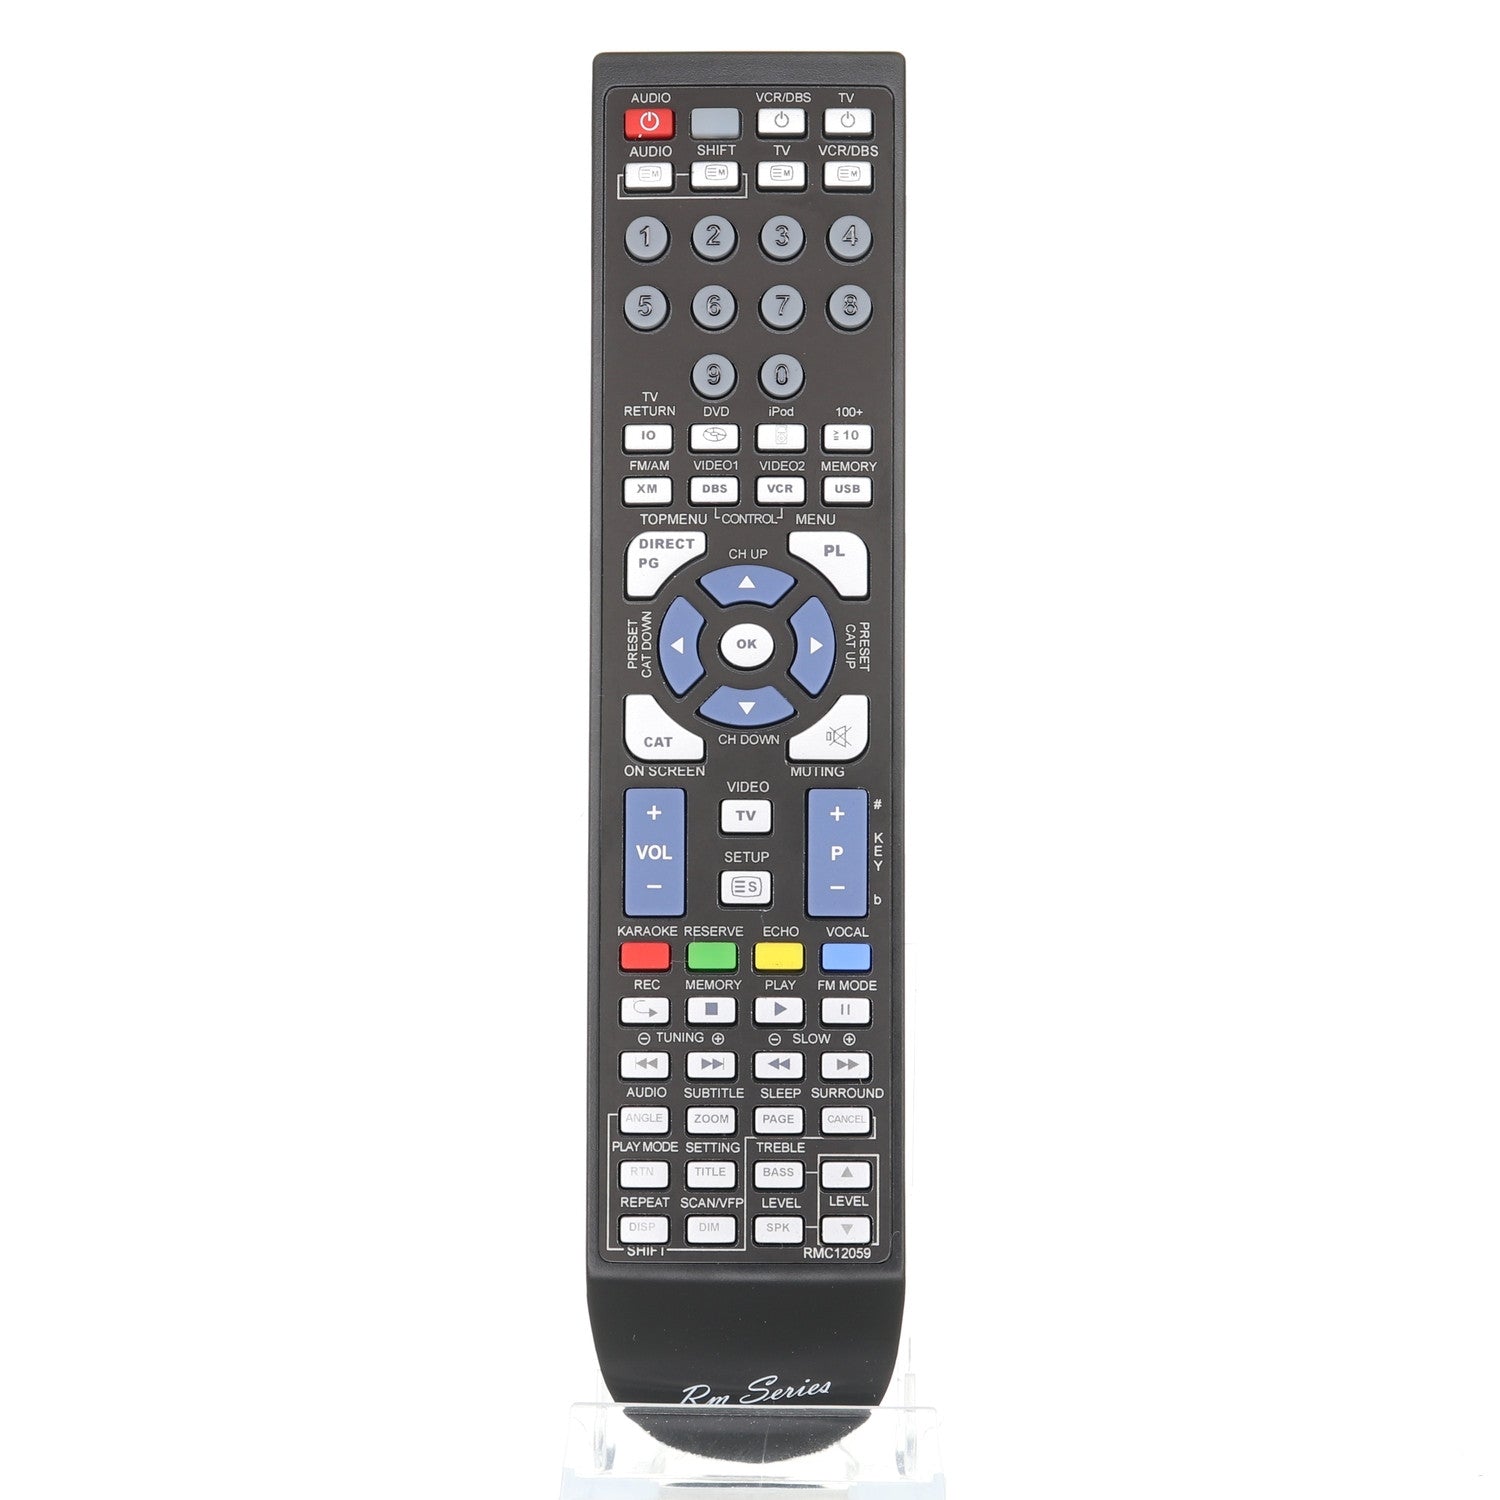 RMC12059 (RM-STHD7J) Remote Control for JVC® Audio Video Receivers